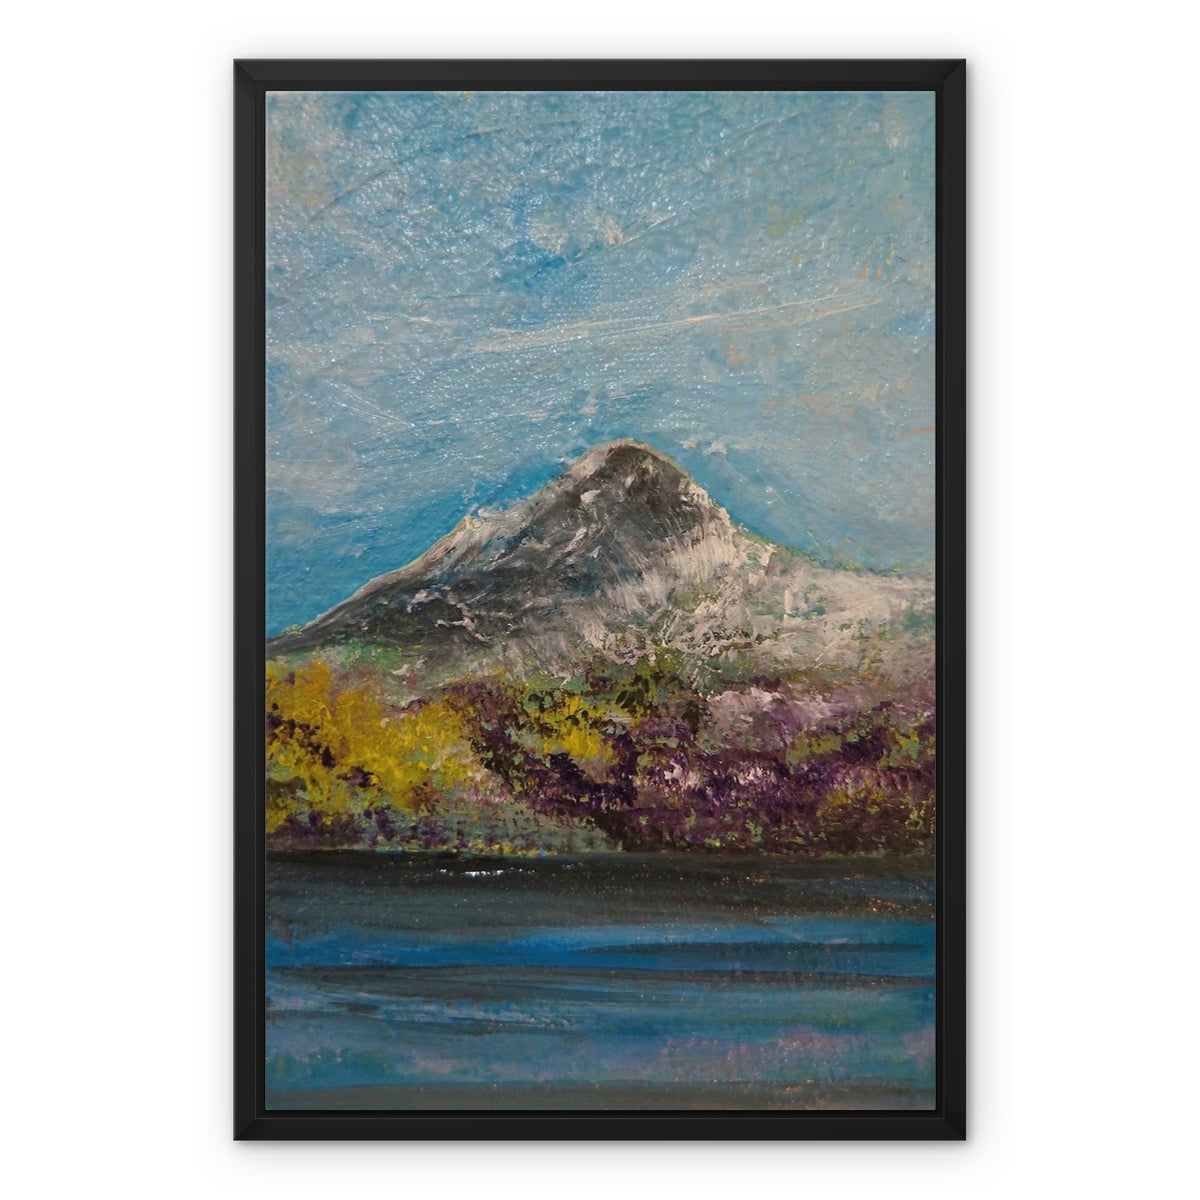 Ben Lomond ii Painting | Framed Canvas-Floating Framed Canvas Prints-Scottish Lochs & Mountains Art Gallery-18"x24"-Black Frame-Paintings, Prints, Homeware, Art Gifts From Scotland By Scottish Artist Kevin Hunter